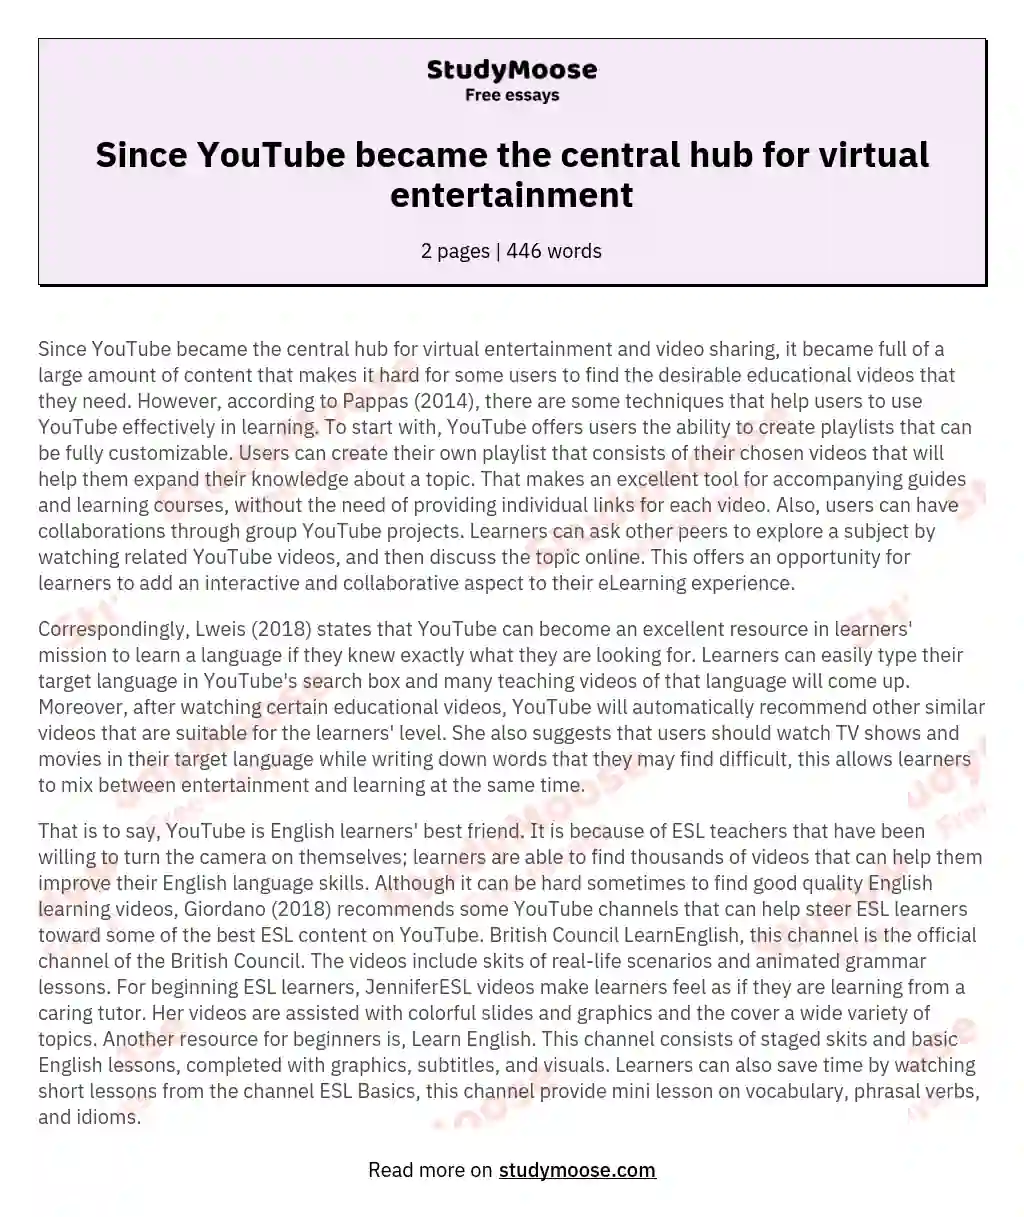 Since YouTube became the central hub for virtual entertainment essay